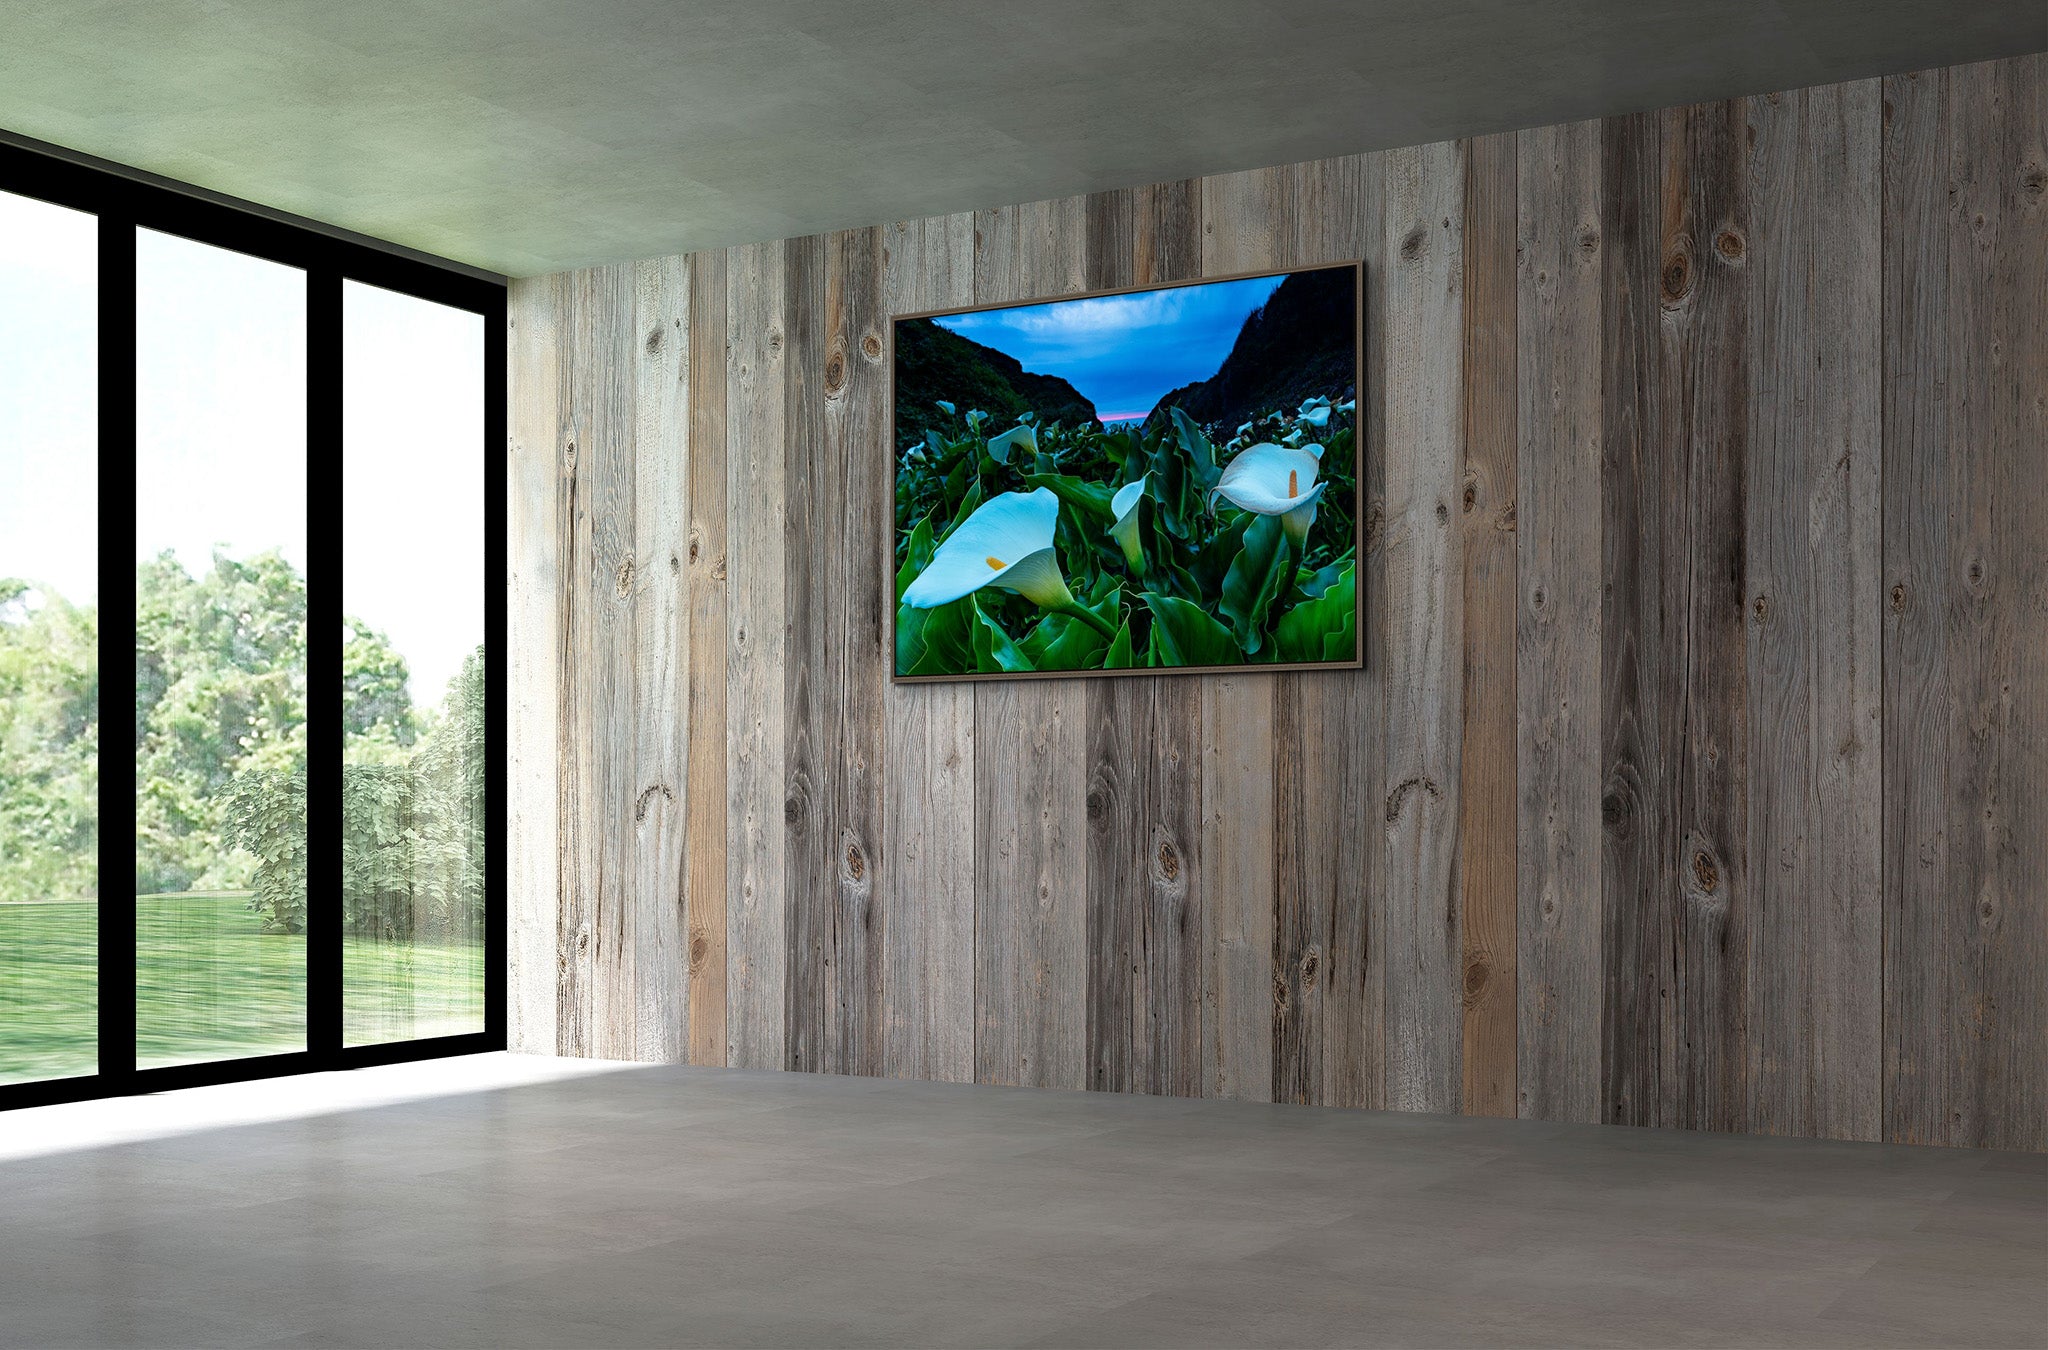 Picture hanging on the wall of empty room. The picture is a fine art landscape photograph titled "Calla Lily Valley" by Cameron Dreaux of Dreaux Fine Art.